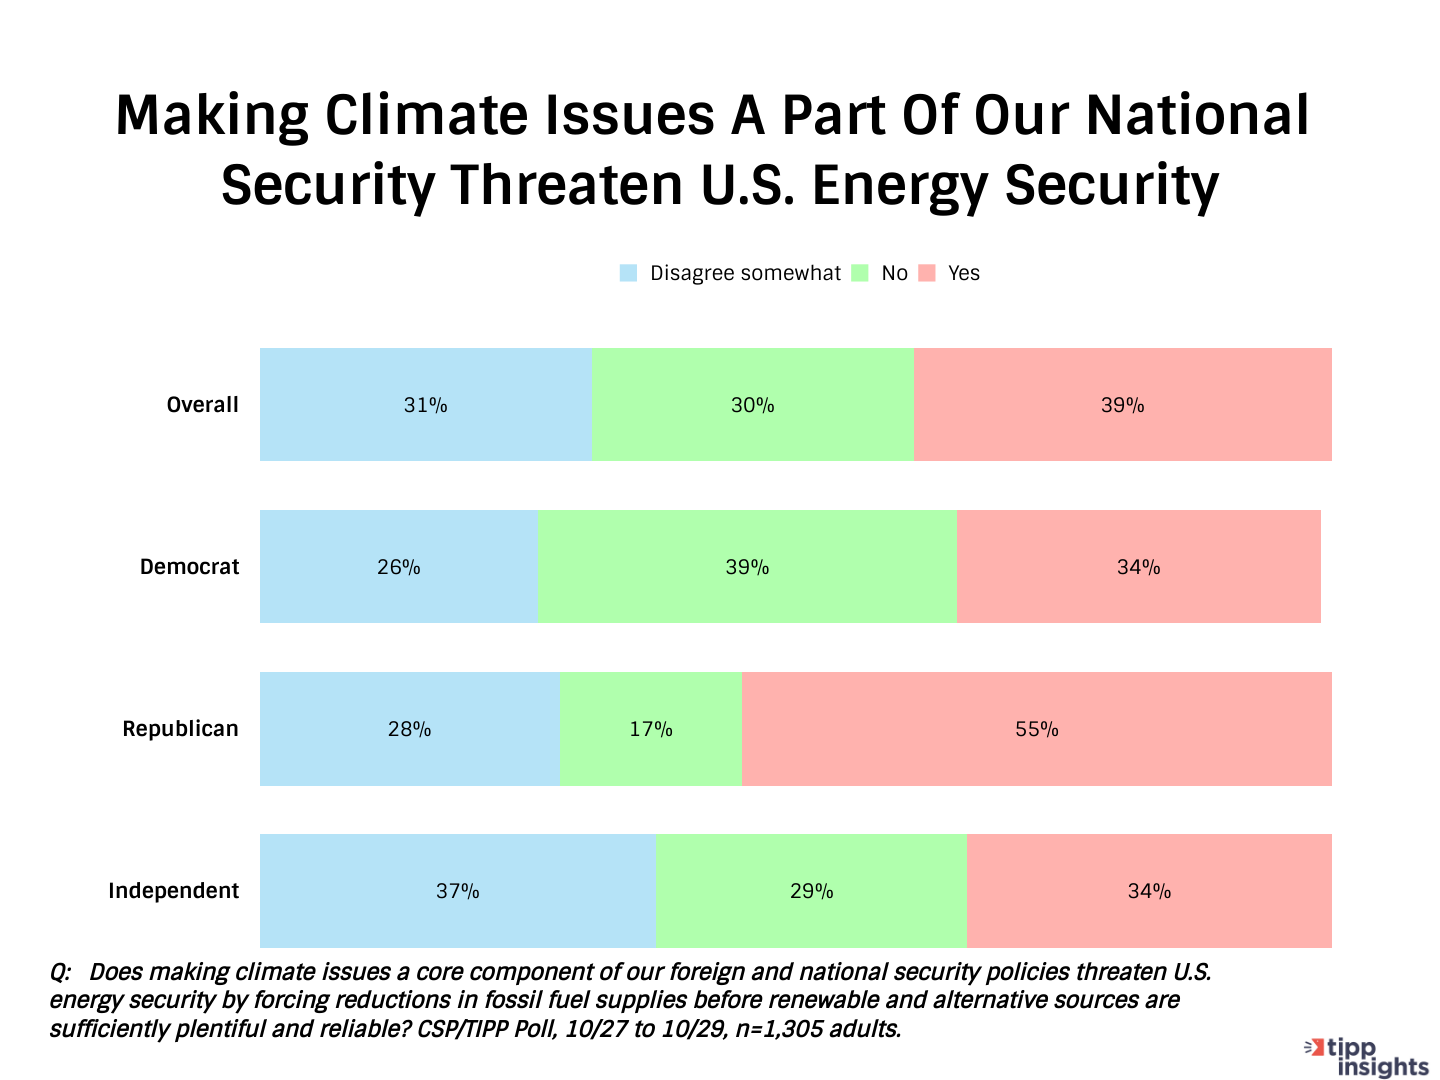 CSP/TIPP Poll Results: Does making climate issues a part of our national security threat u.s energy security